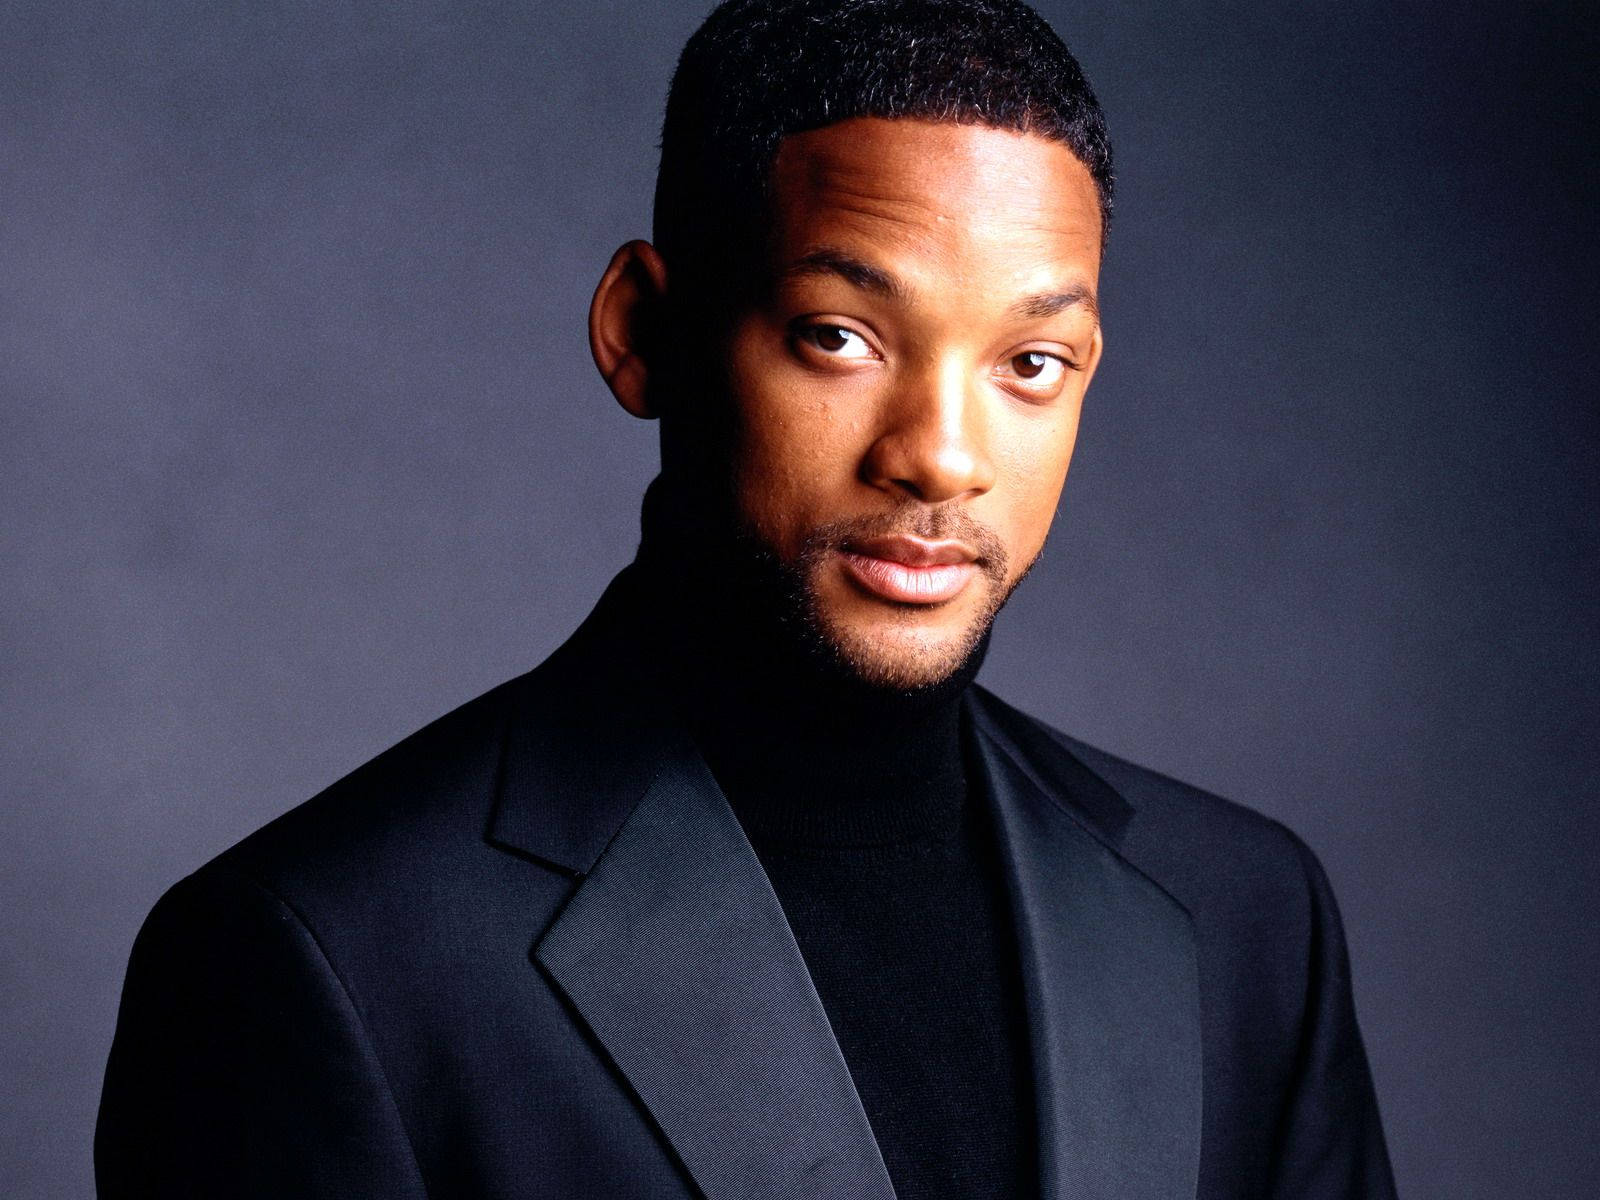 Will Smith In All Black Suit